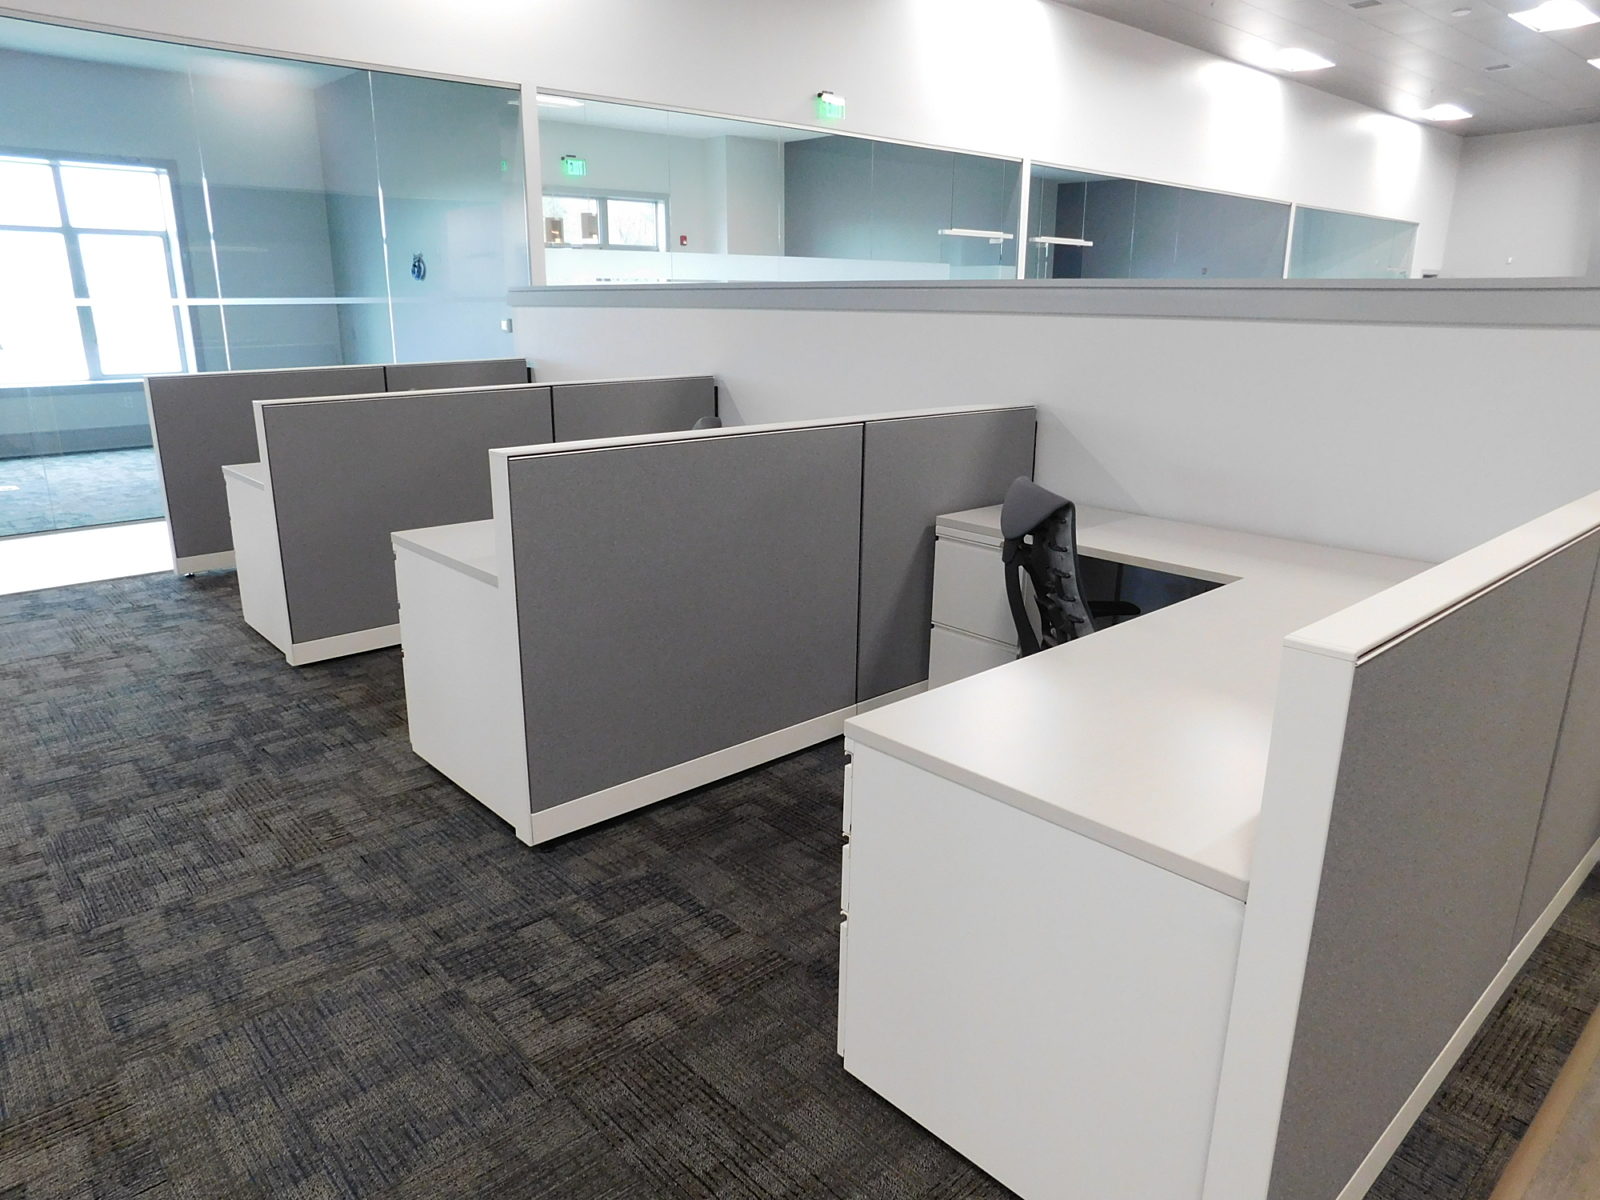 Herman Miller workstations with dark grey fabric panels and white worksurface and storage